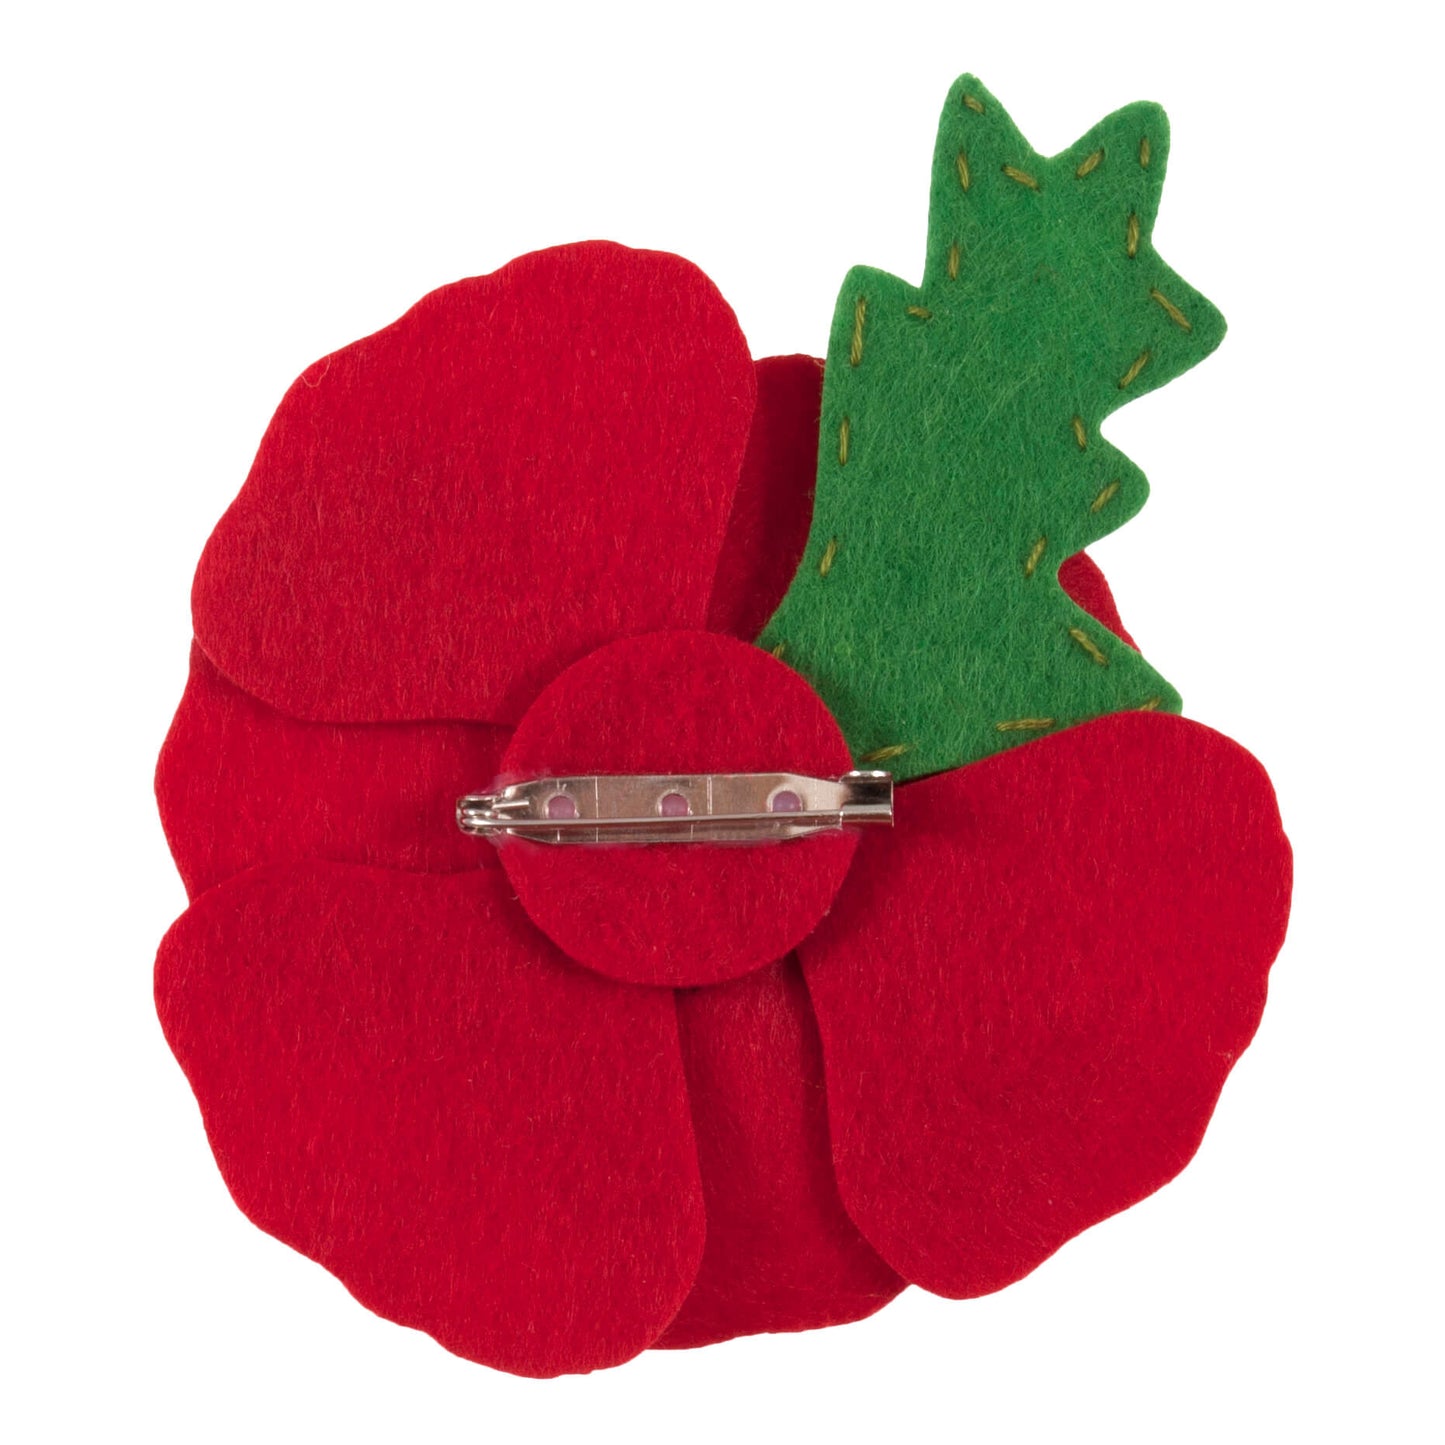 The image shows a felt poppy brooch with a green leaf on a white background.